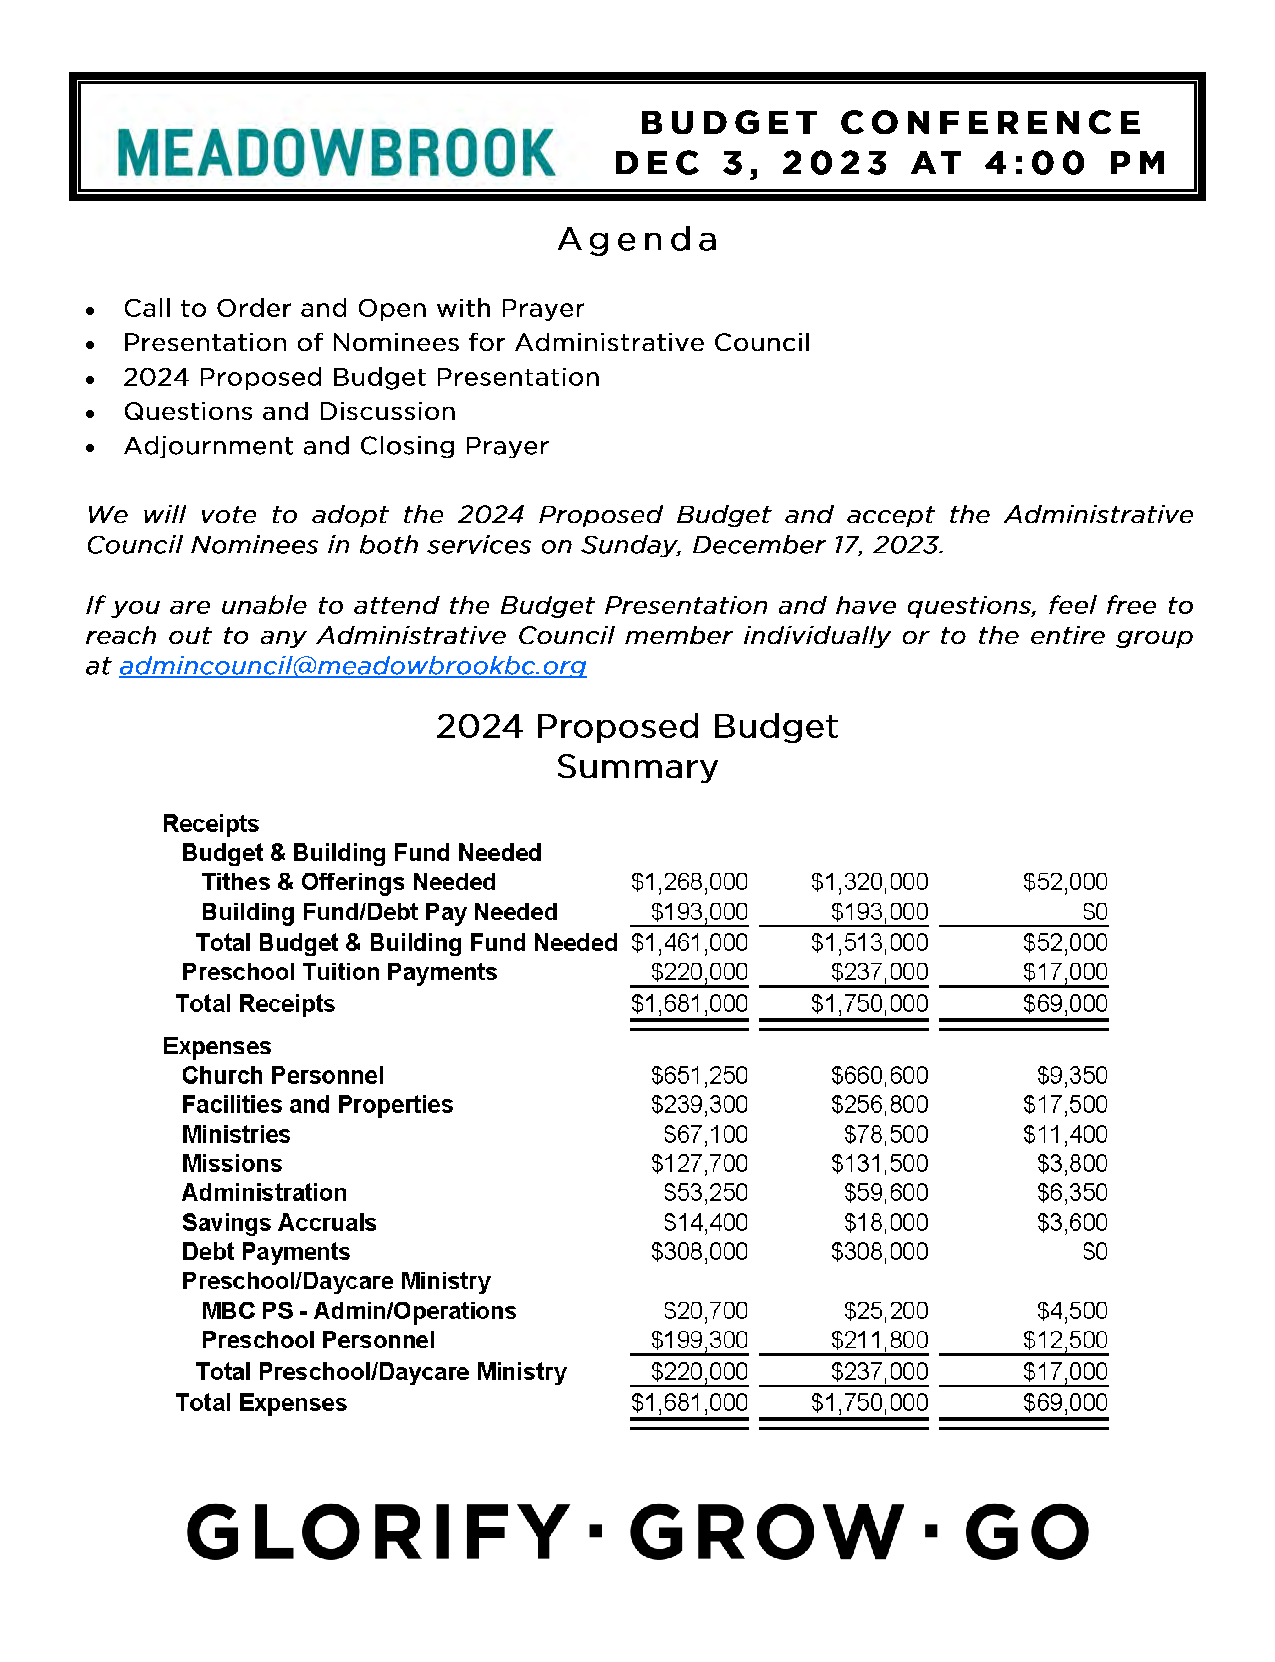 2024 Proposed Budget Conference Packet 12-3-23_Page_1.png